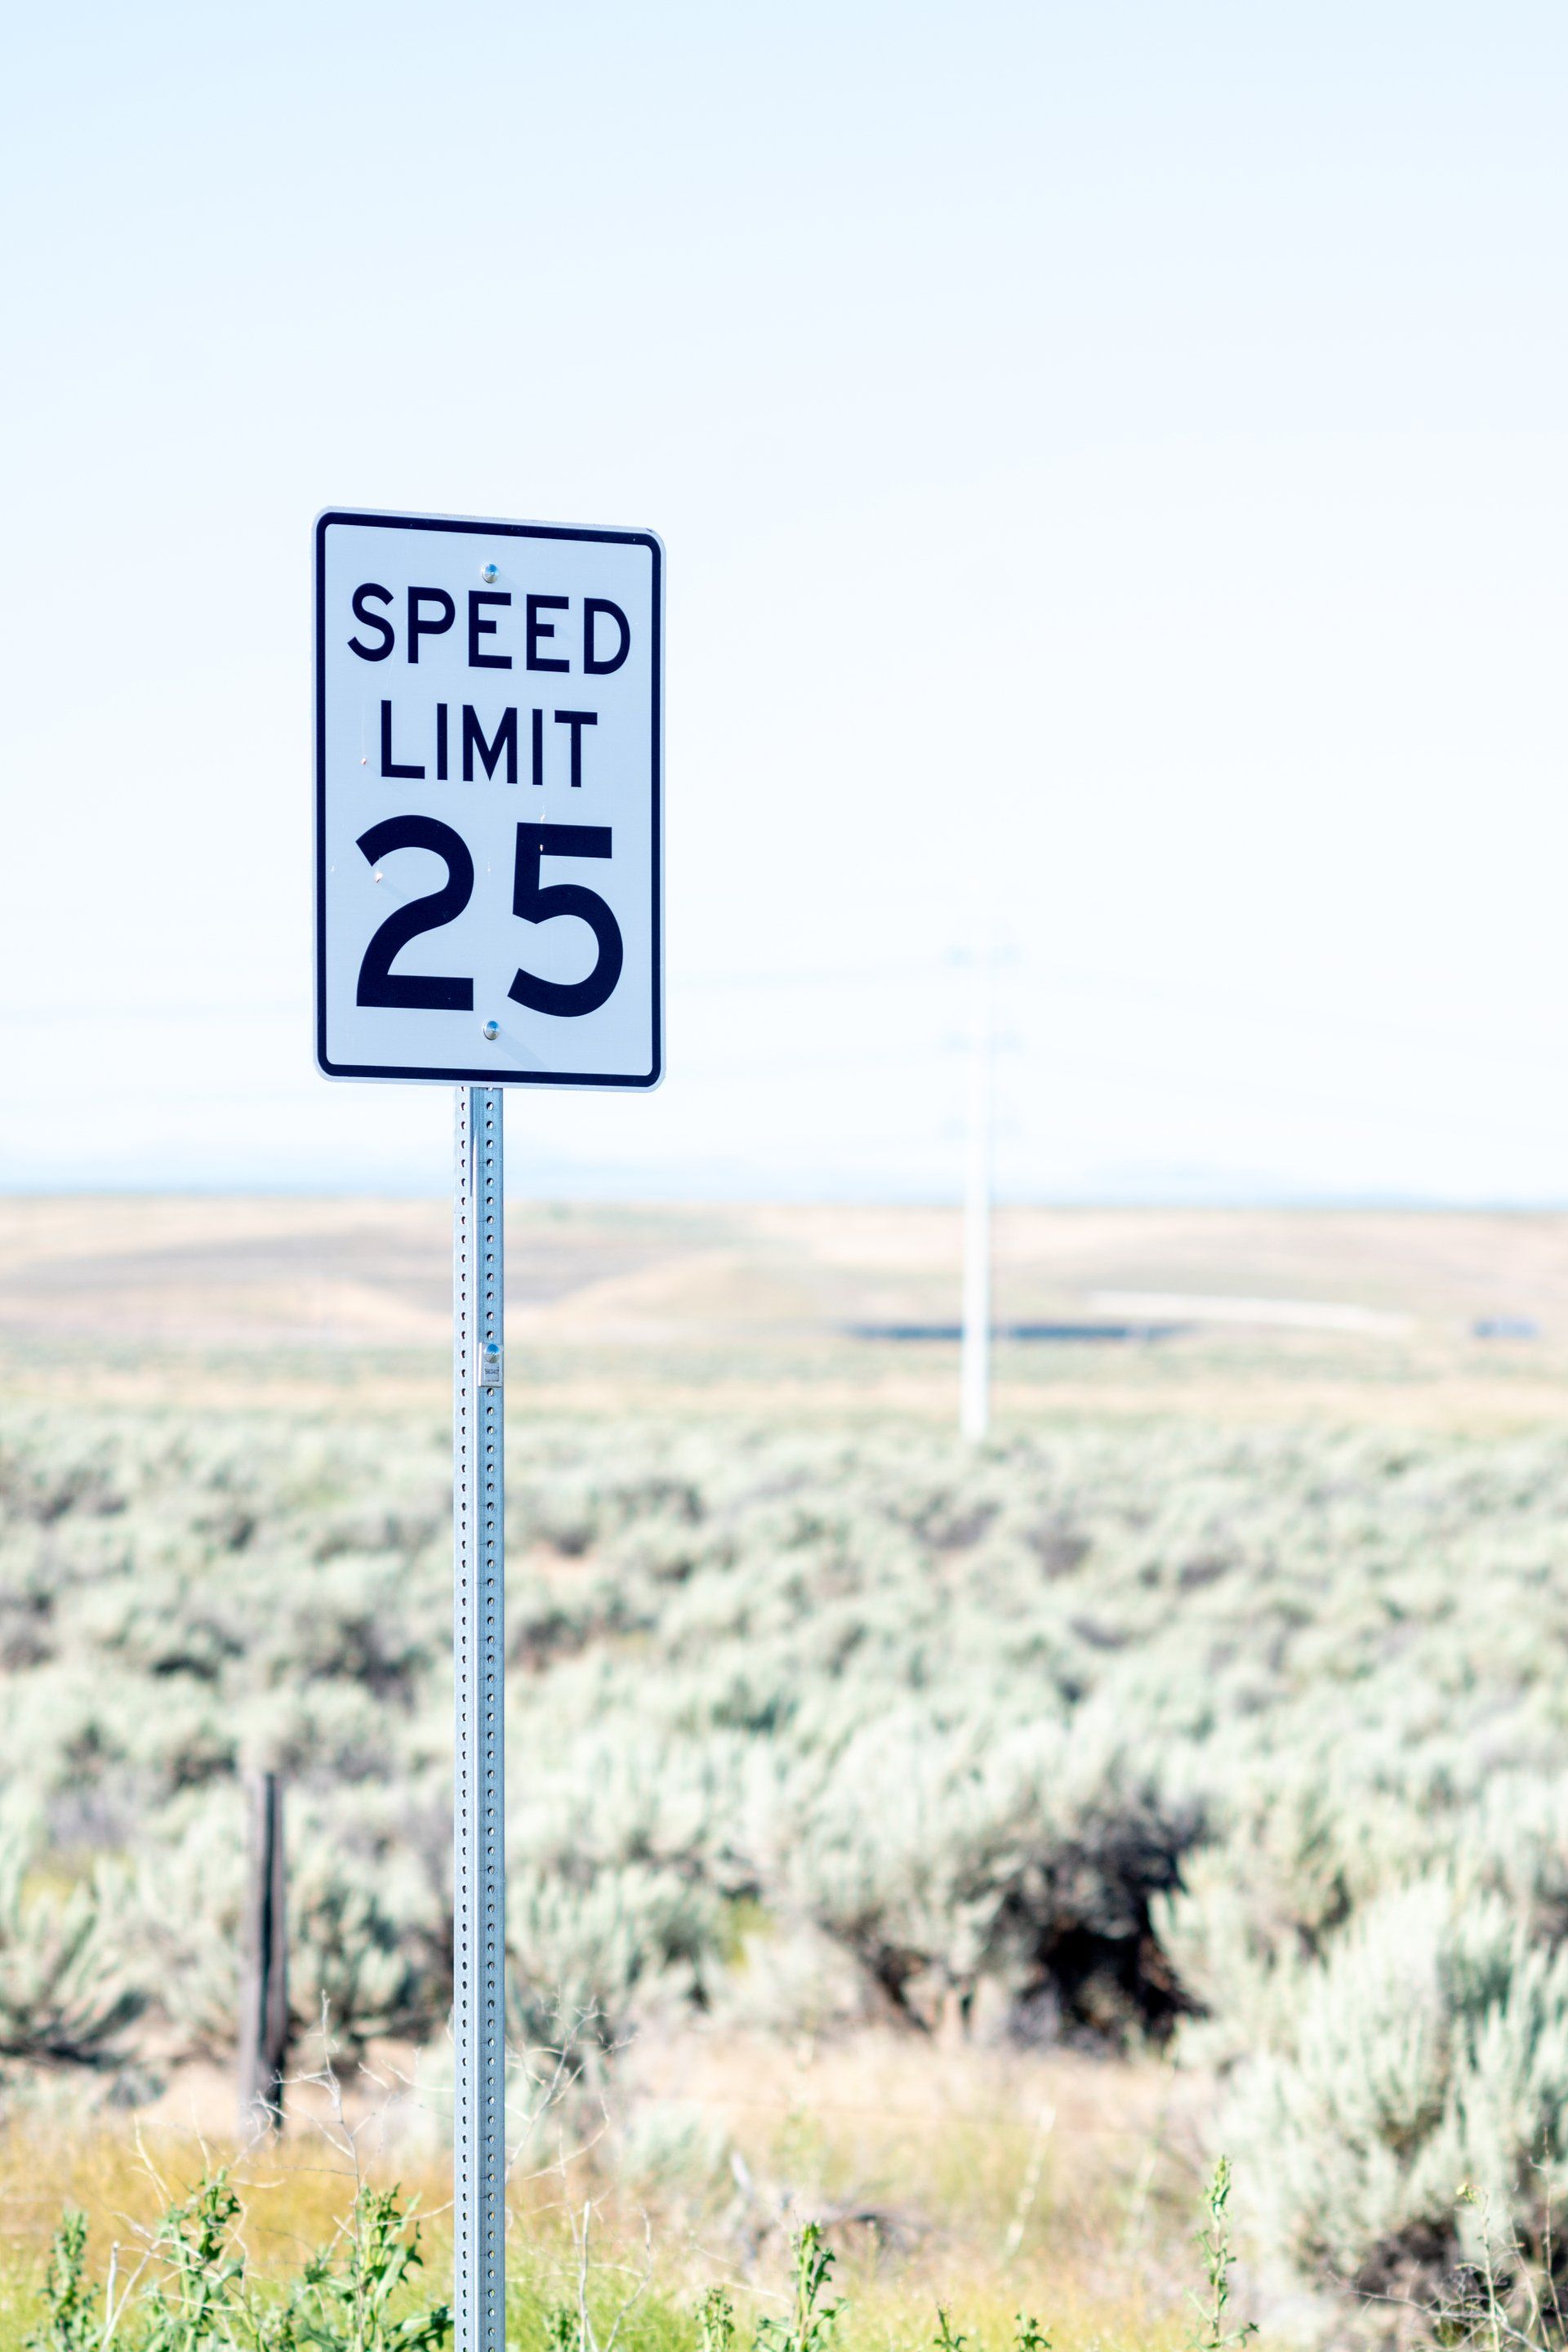 Mandatory Speed Limiters Under Consideration Once Again